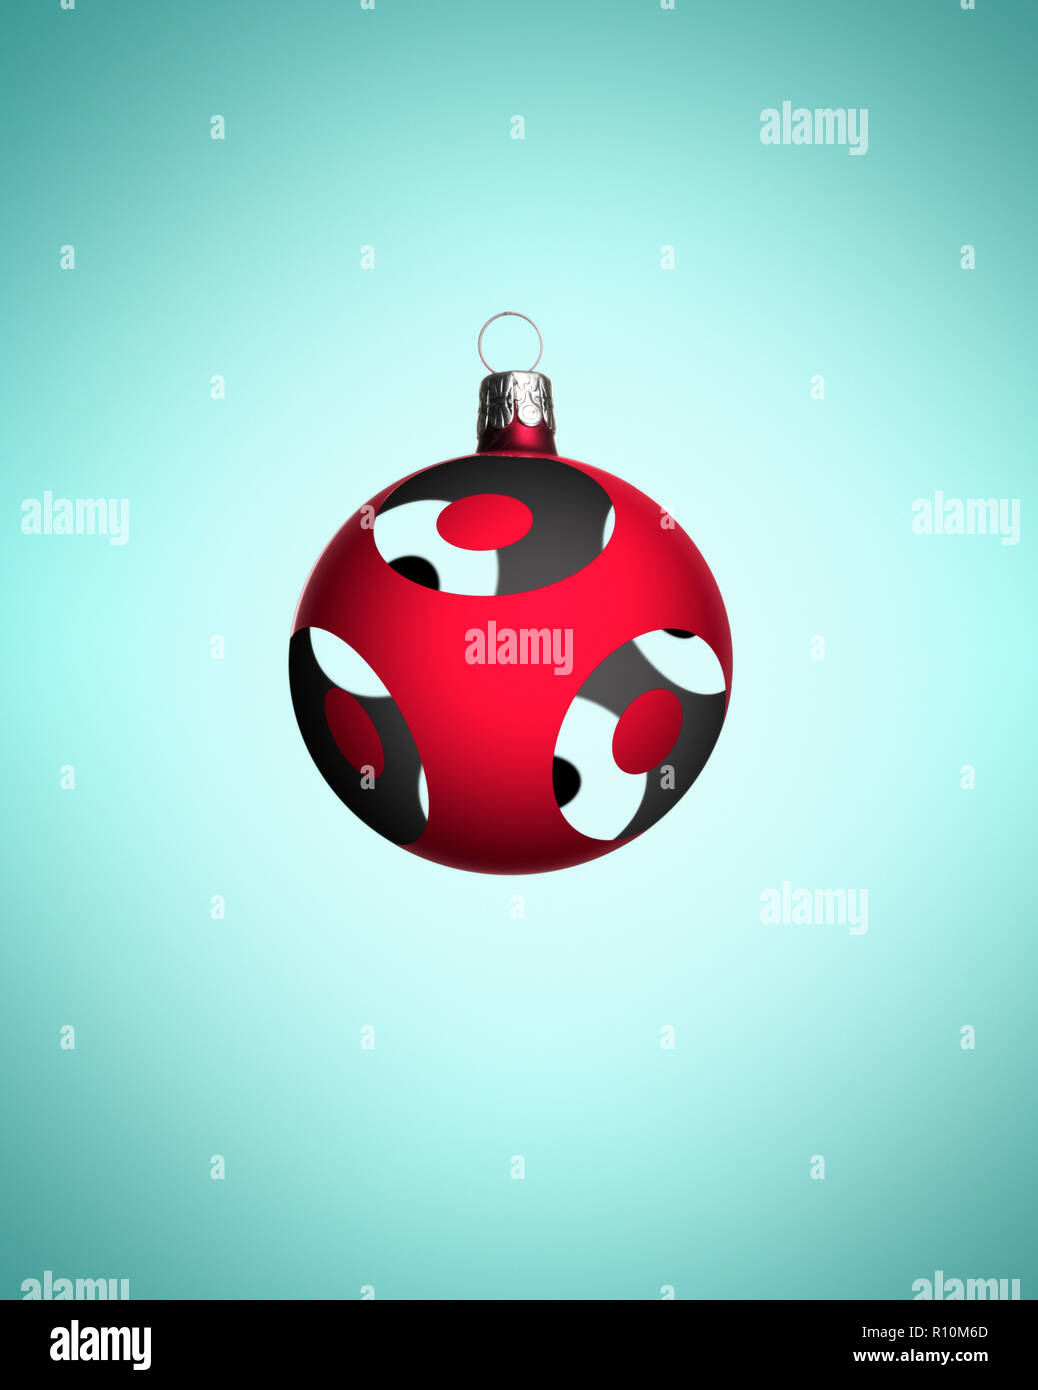 Stylish red Christmas tree bauble with pattern Stock Photo